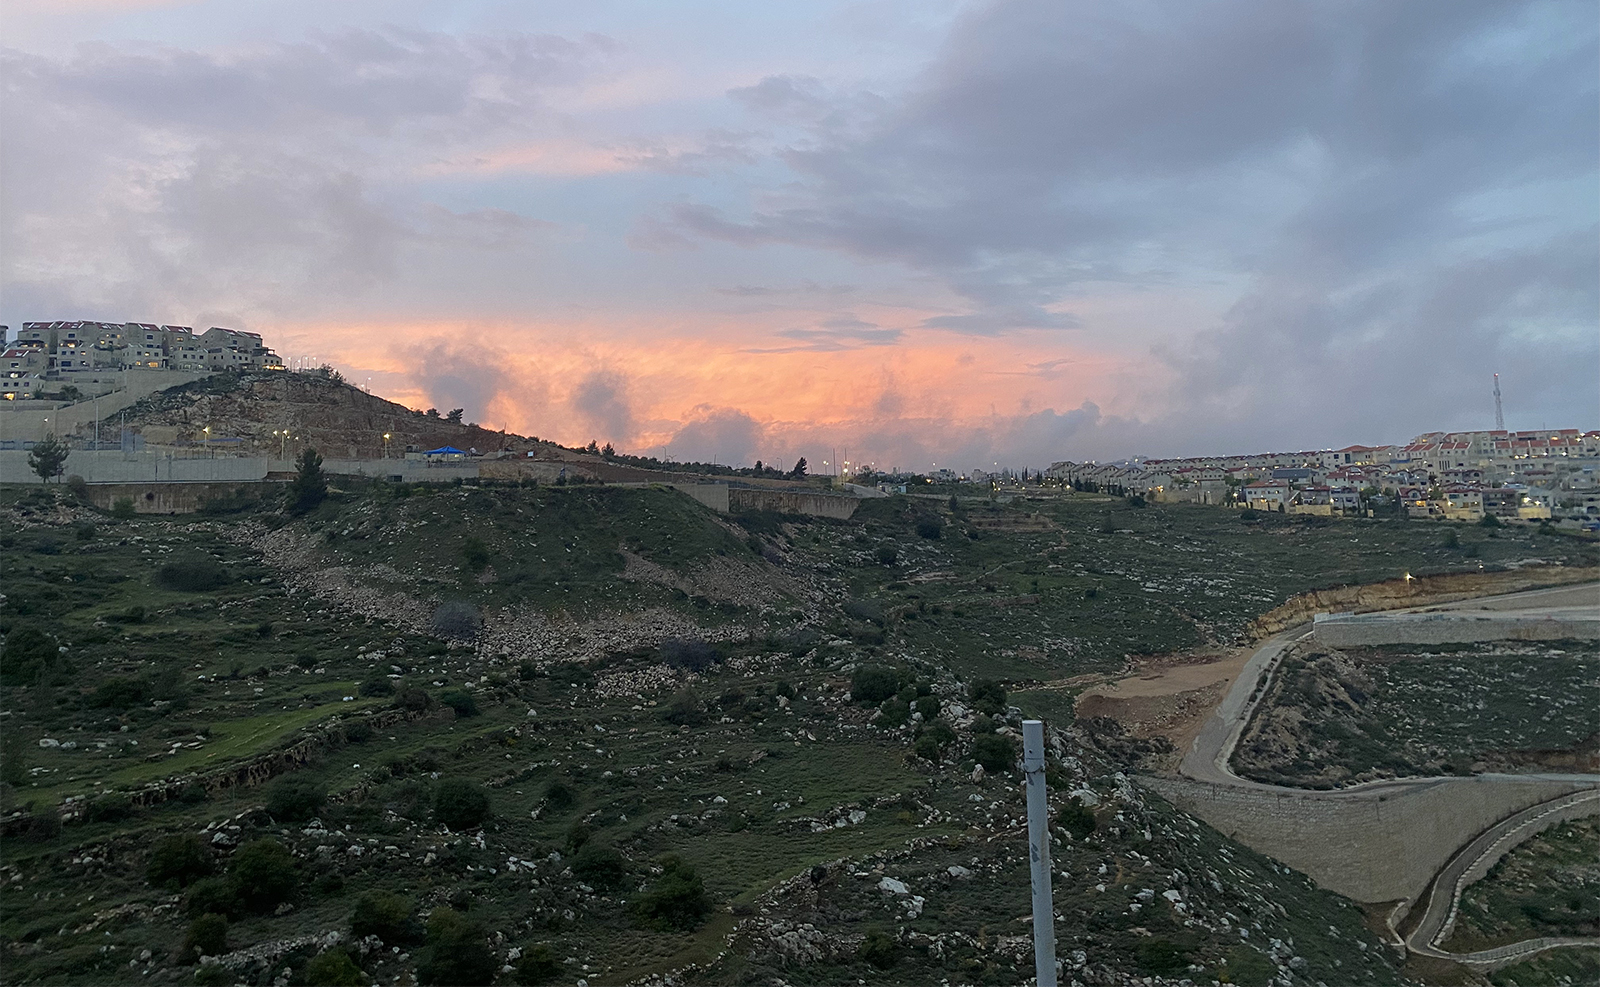 The view from Sara Tesler’s home in Efrat, an Israeli settlement in the West Bank, on March 14, 2023. Photo by Henrietta McFarlane